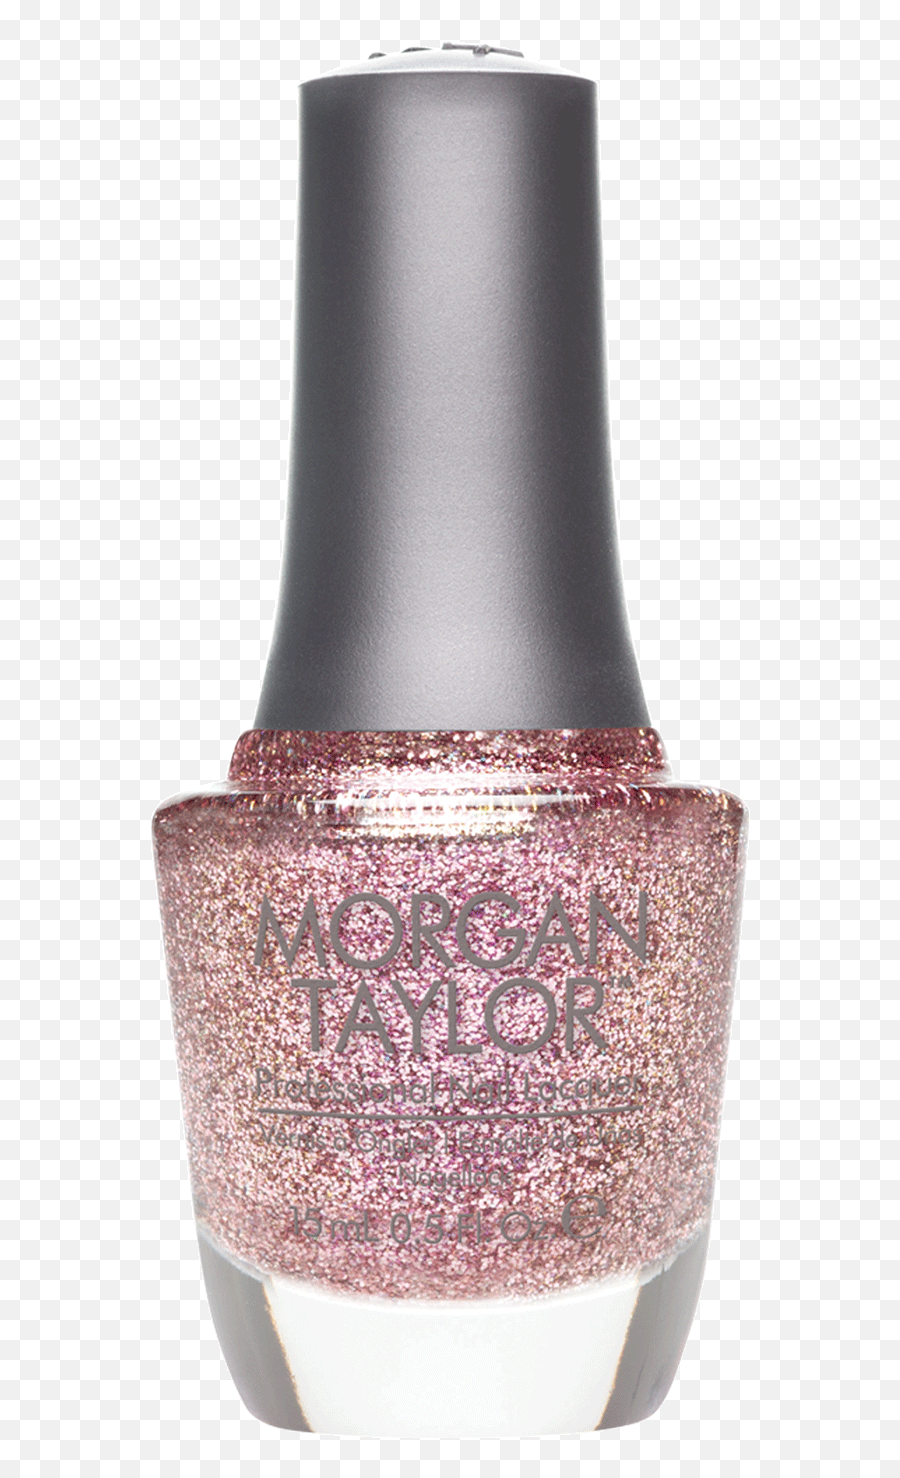 Professional Nail Lacquer - Morgan Taylor Cosmoprof Morgan Taylor Nail Polish Colours Png,Nail Polish Bottle Icon